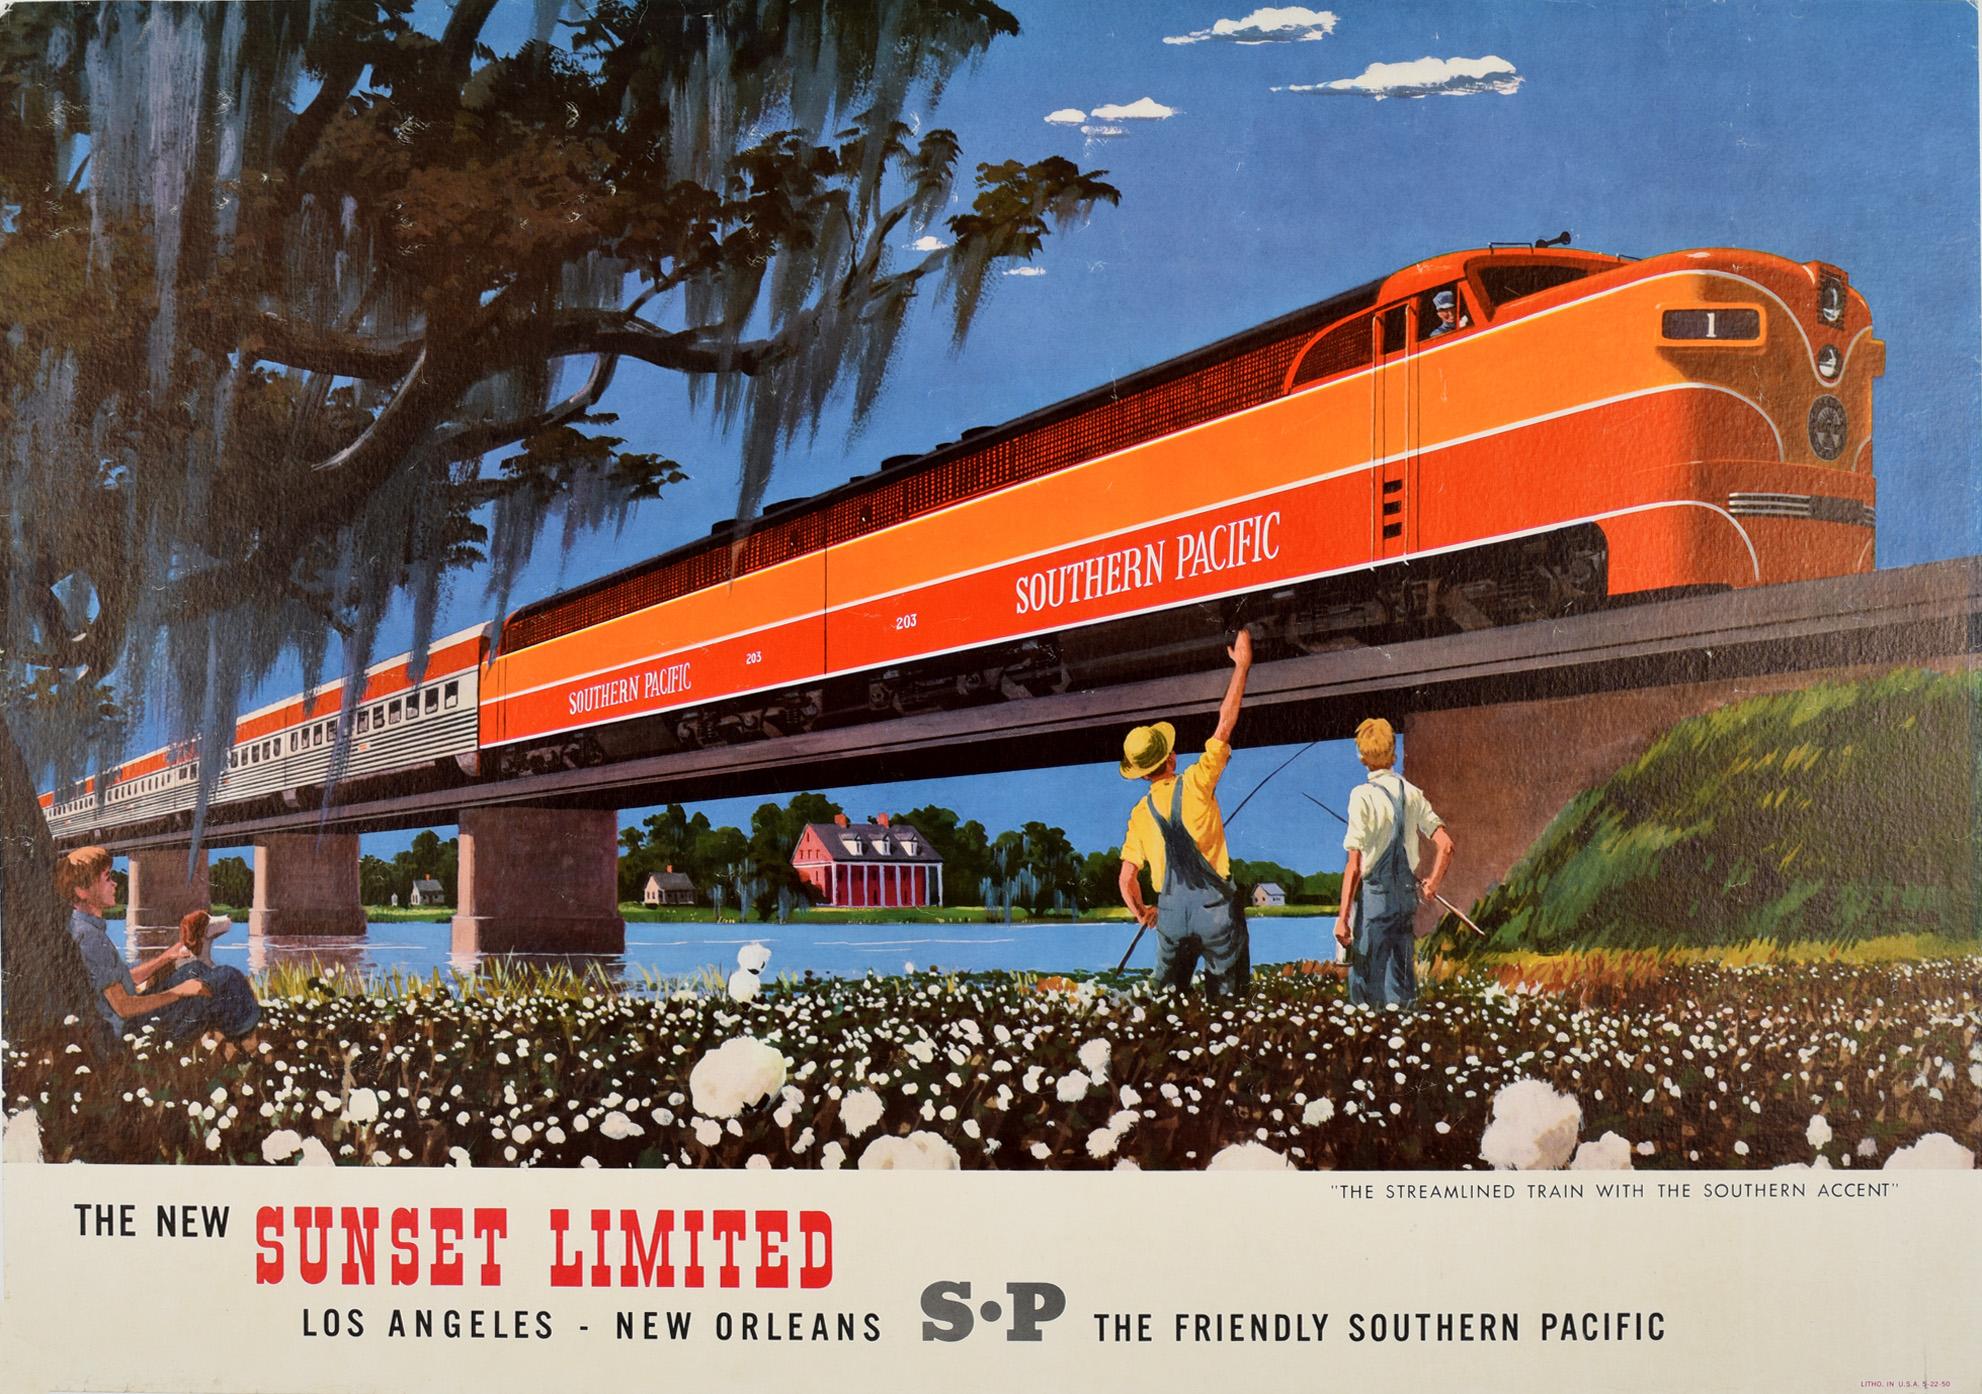 Unknown Print - Original Vintage Travel Poster Sunset Limited Railroad Southern Pacific Railway